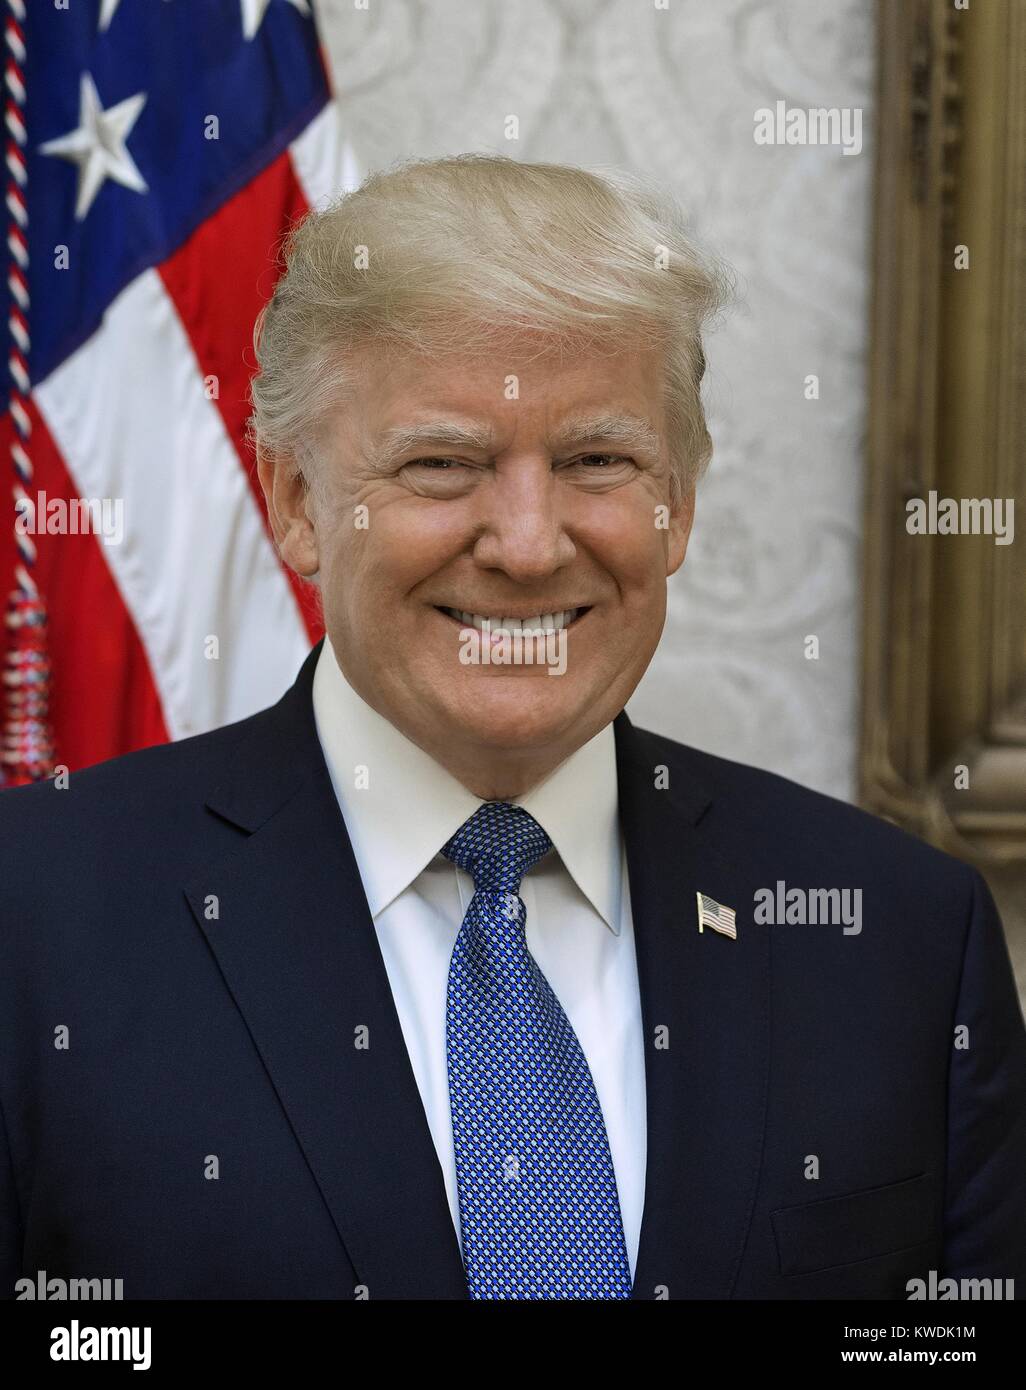 Official photo of President Donald Trump released on Oct. 31, 2017. By White House photographer Shealah Craighead, Oct. 6, 2017 (BSLOC 2017 18 153) Stock Photo